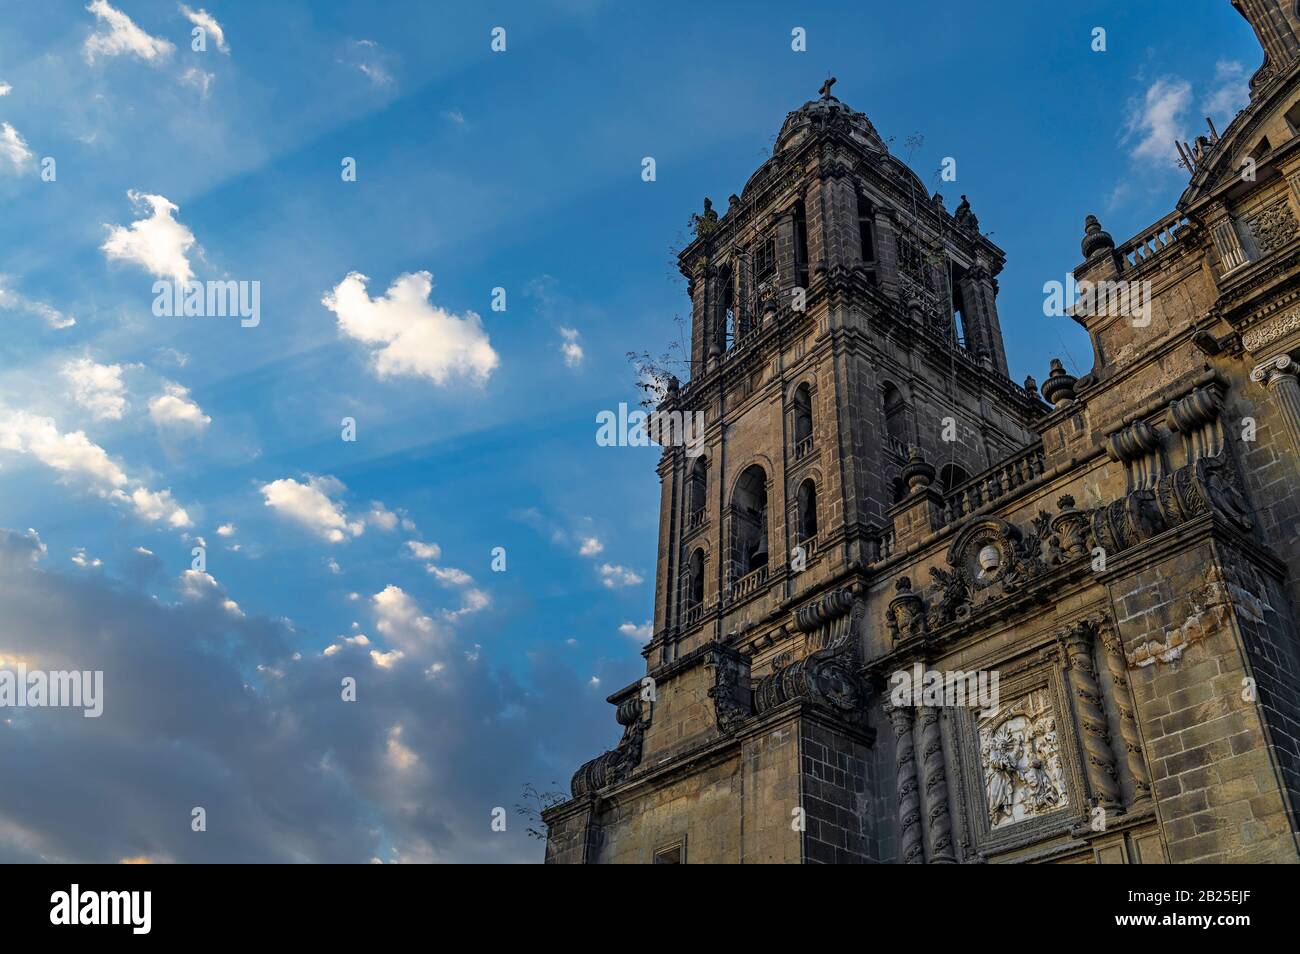 Facade and tower of the Metropolitan Cathedral of Mexico City with a sunbeam illuminating the facade, Mexico. Stock Photo